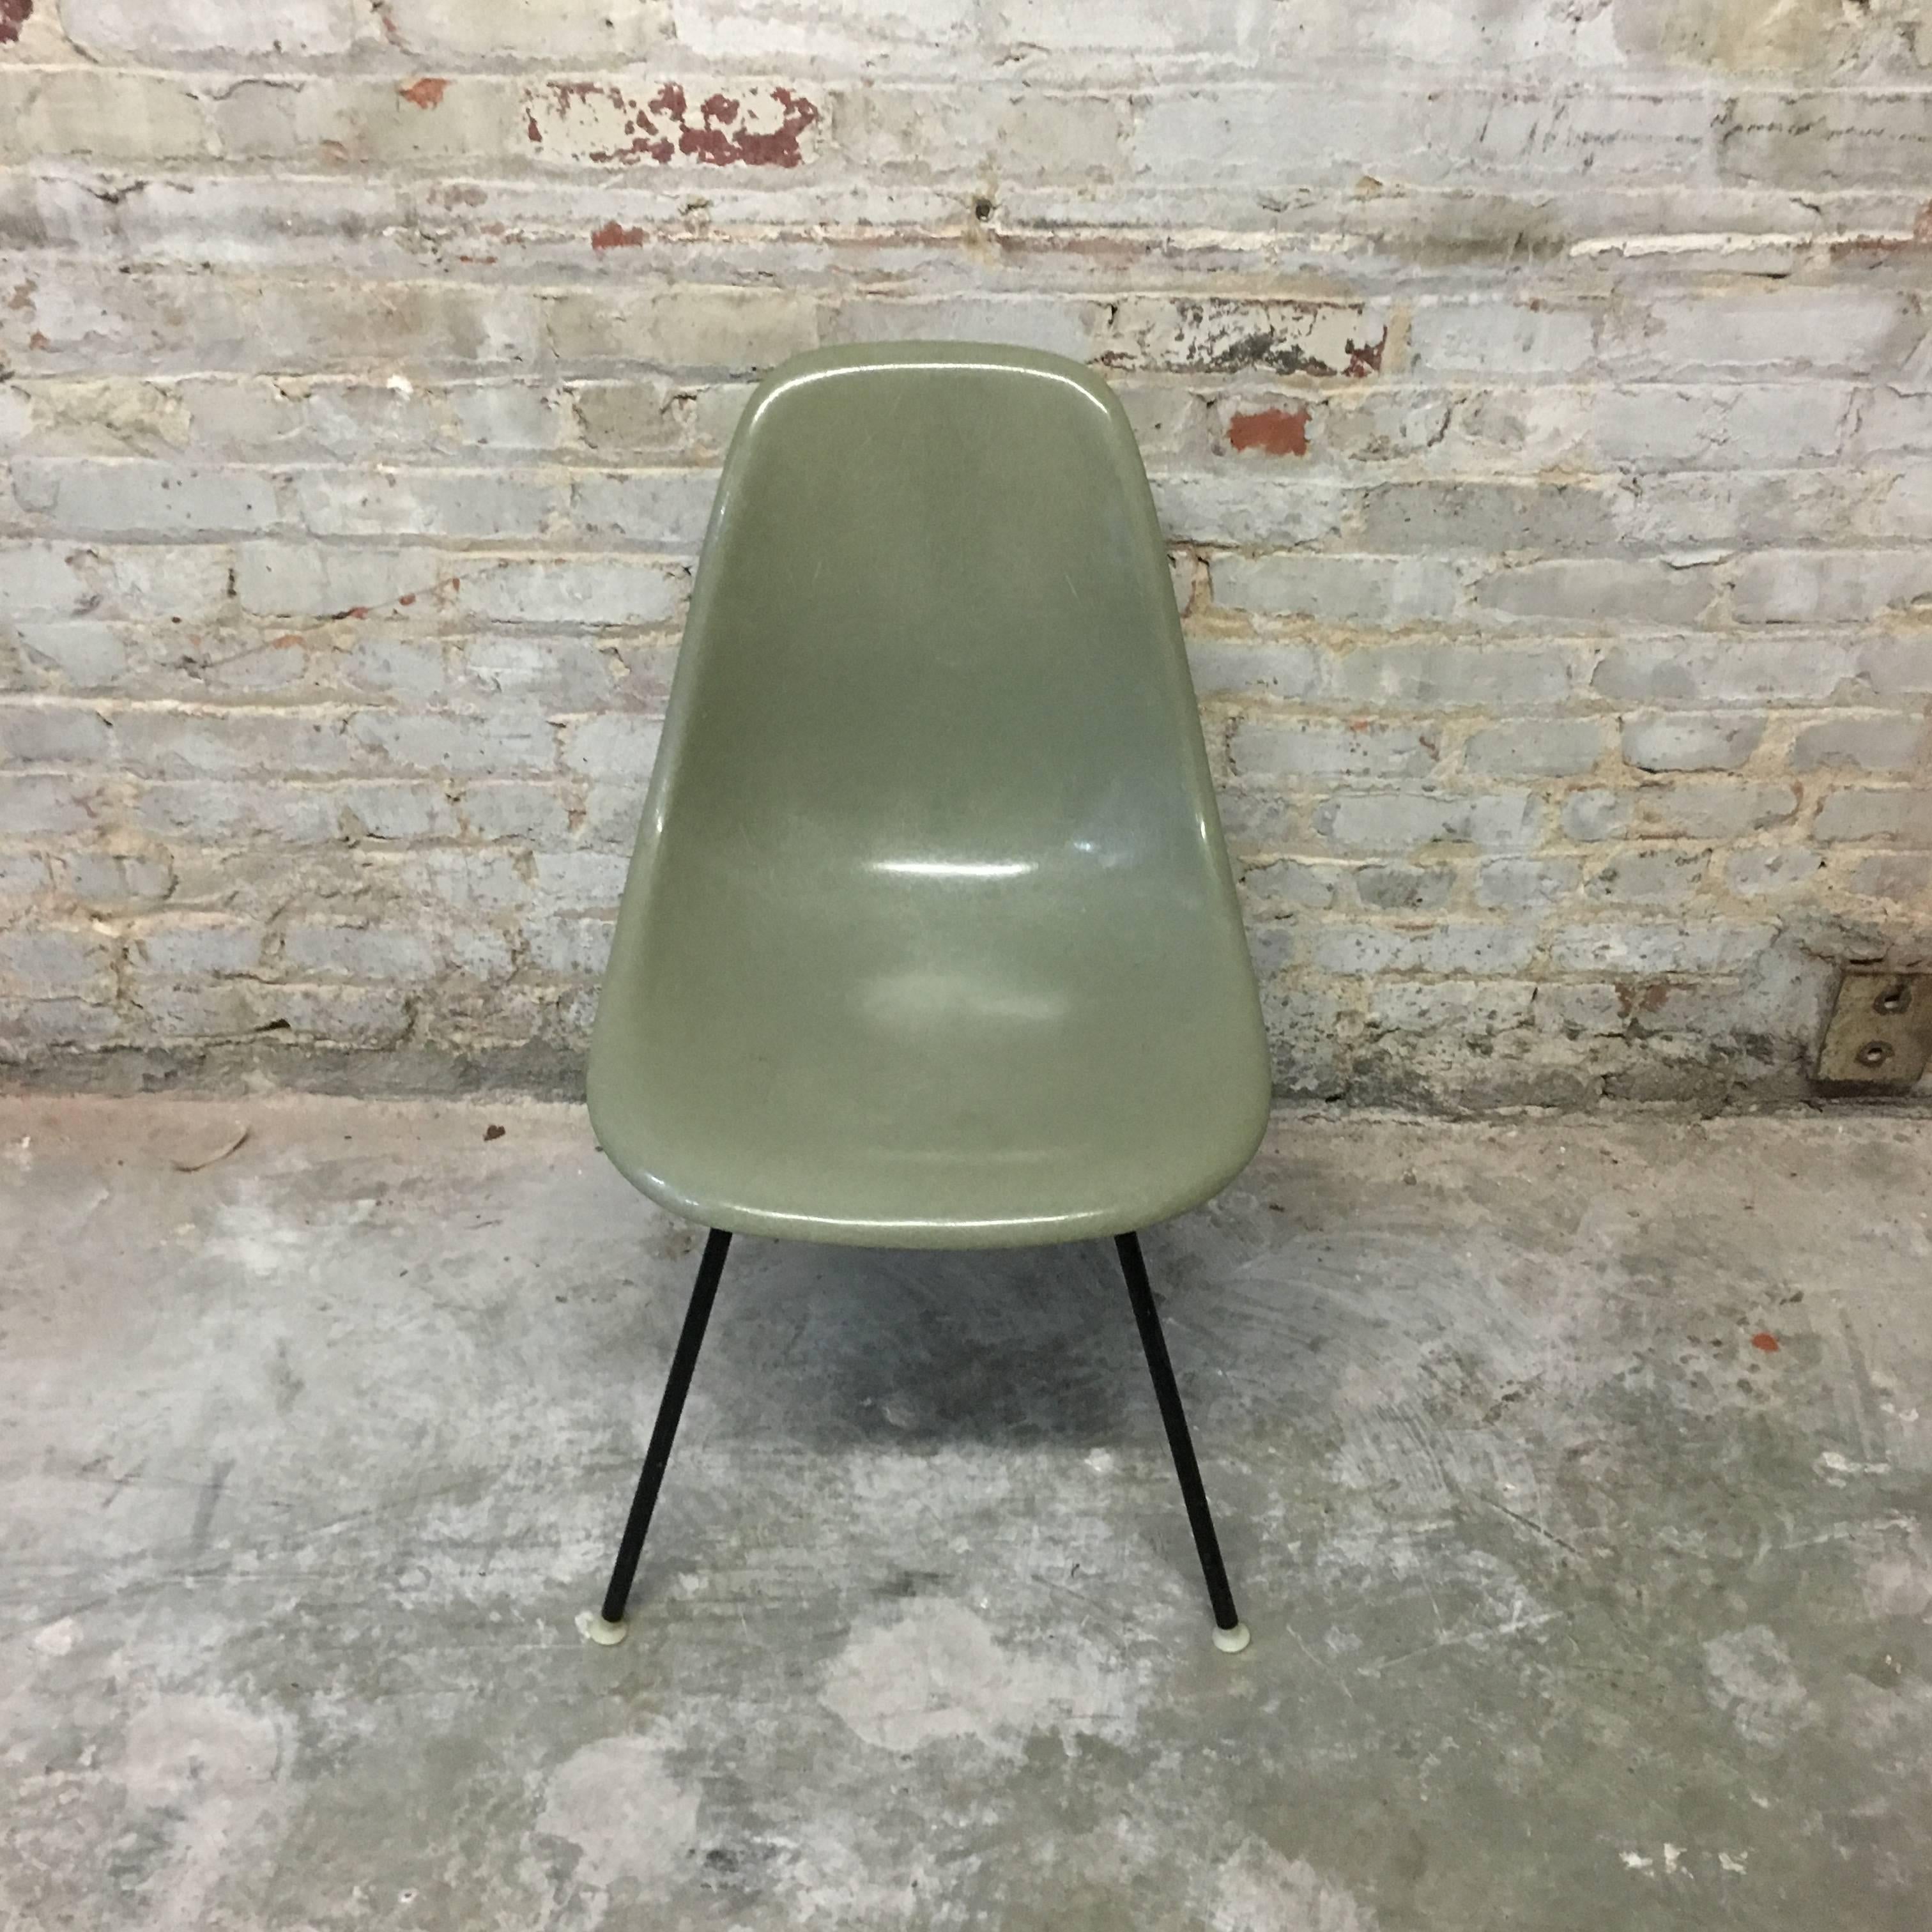 American Four Herman Miller Eames Seafoam Green Dining Chairs